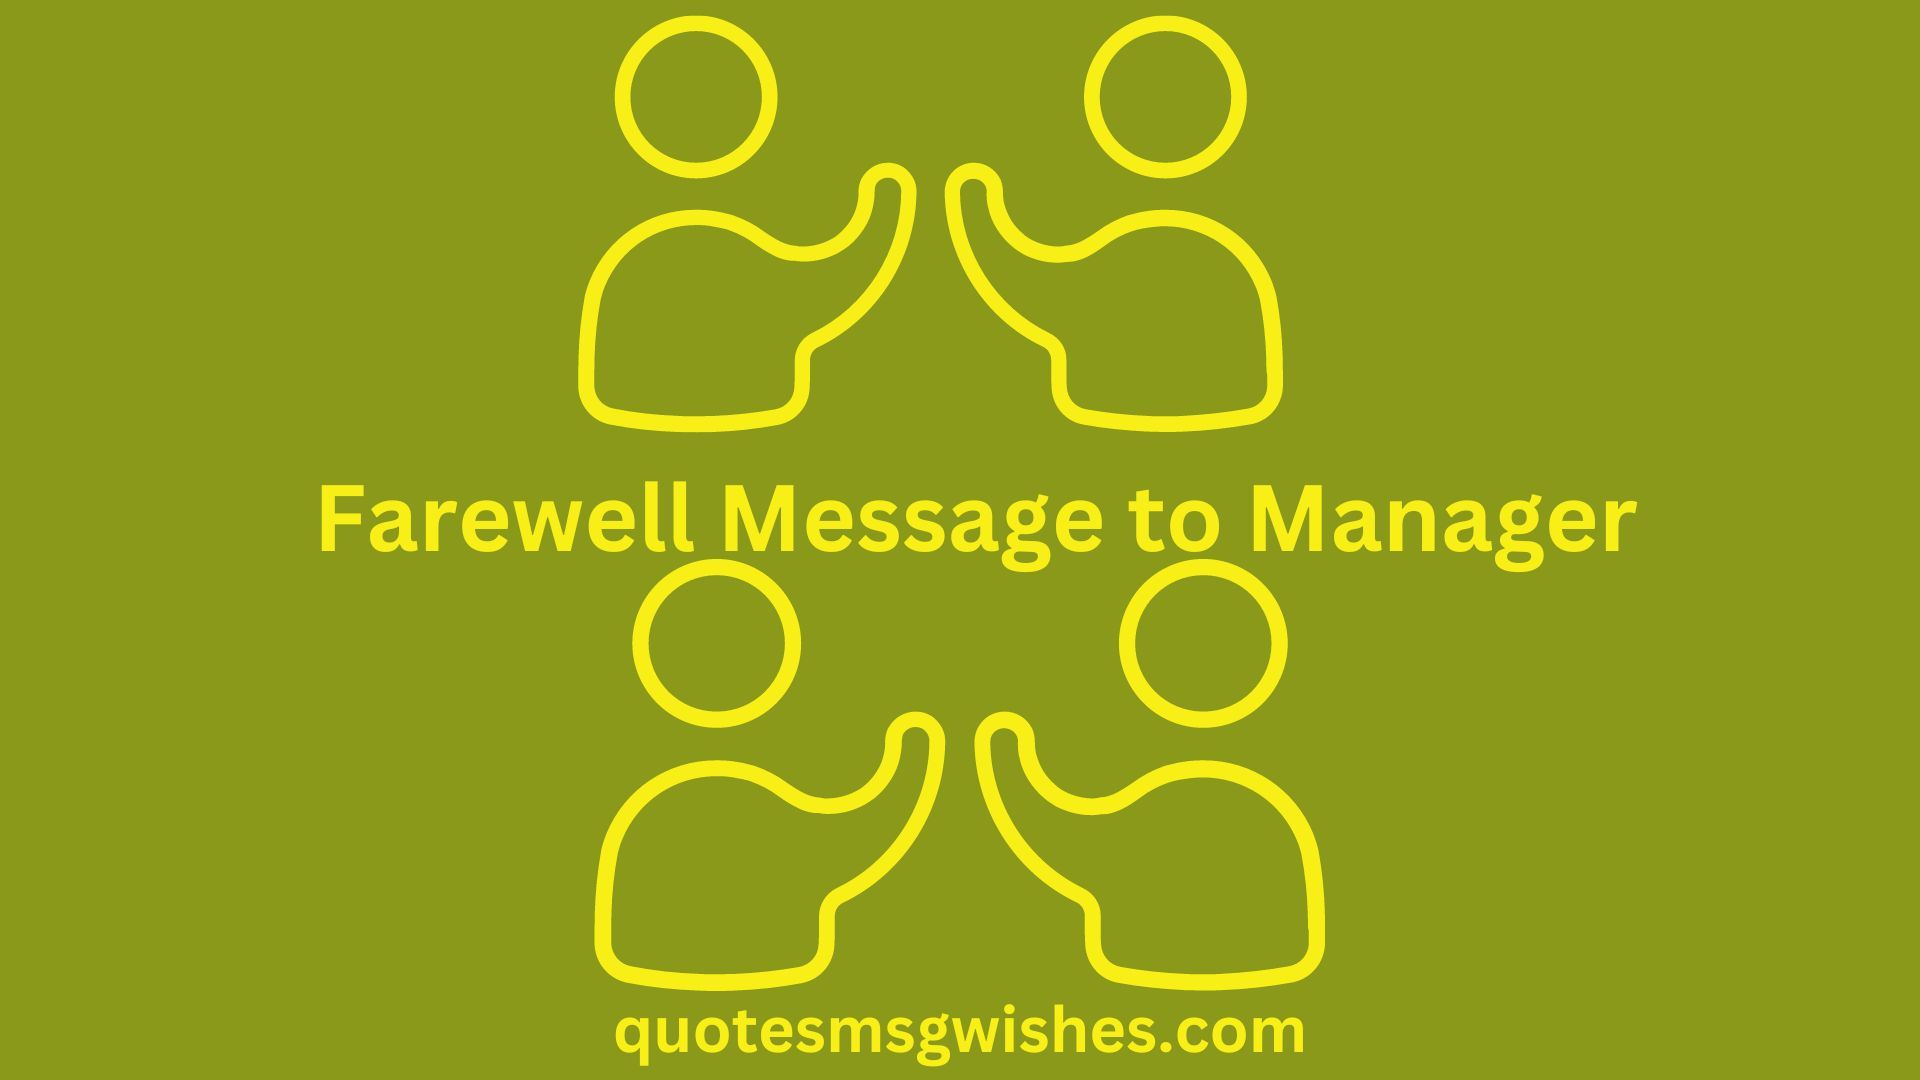 Farewell Message to Manager